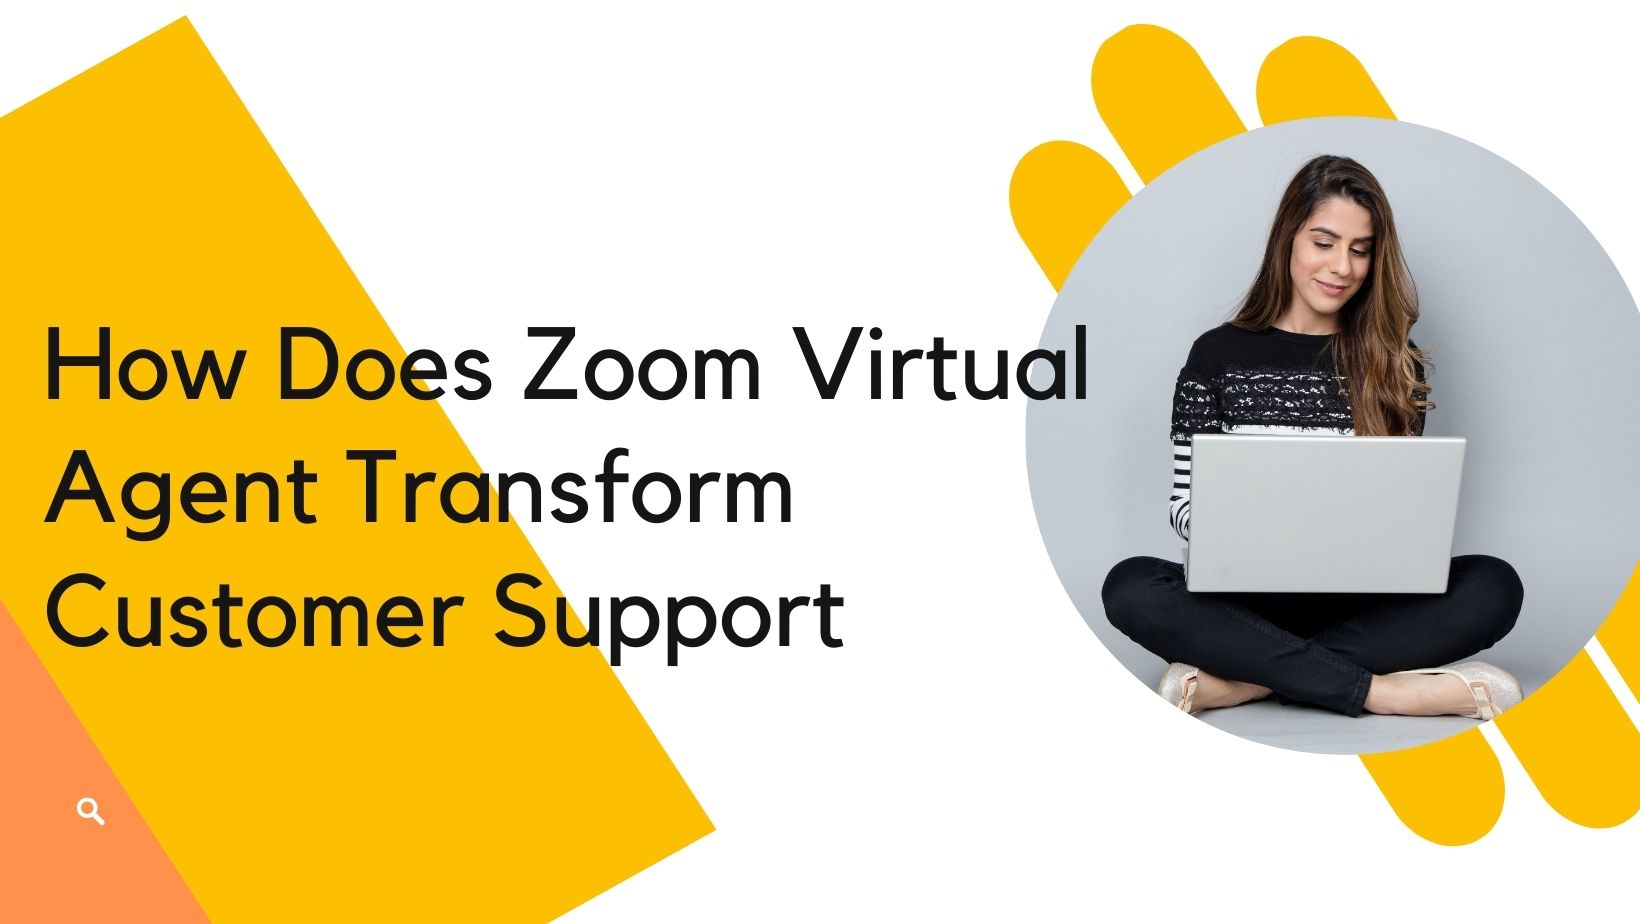 How Does Zoom Virtual Agent Transform Customer Support